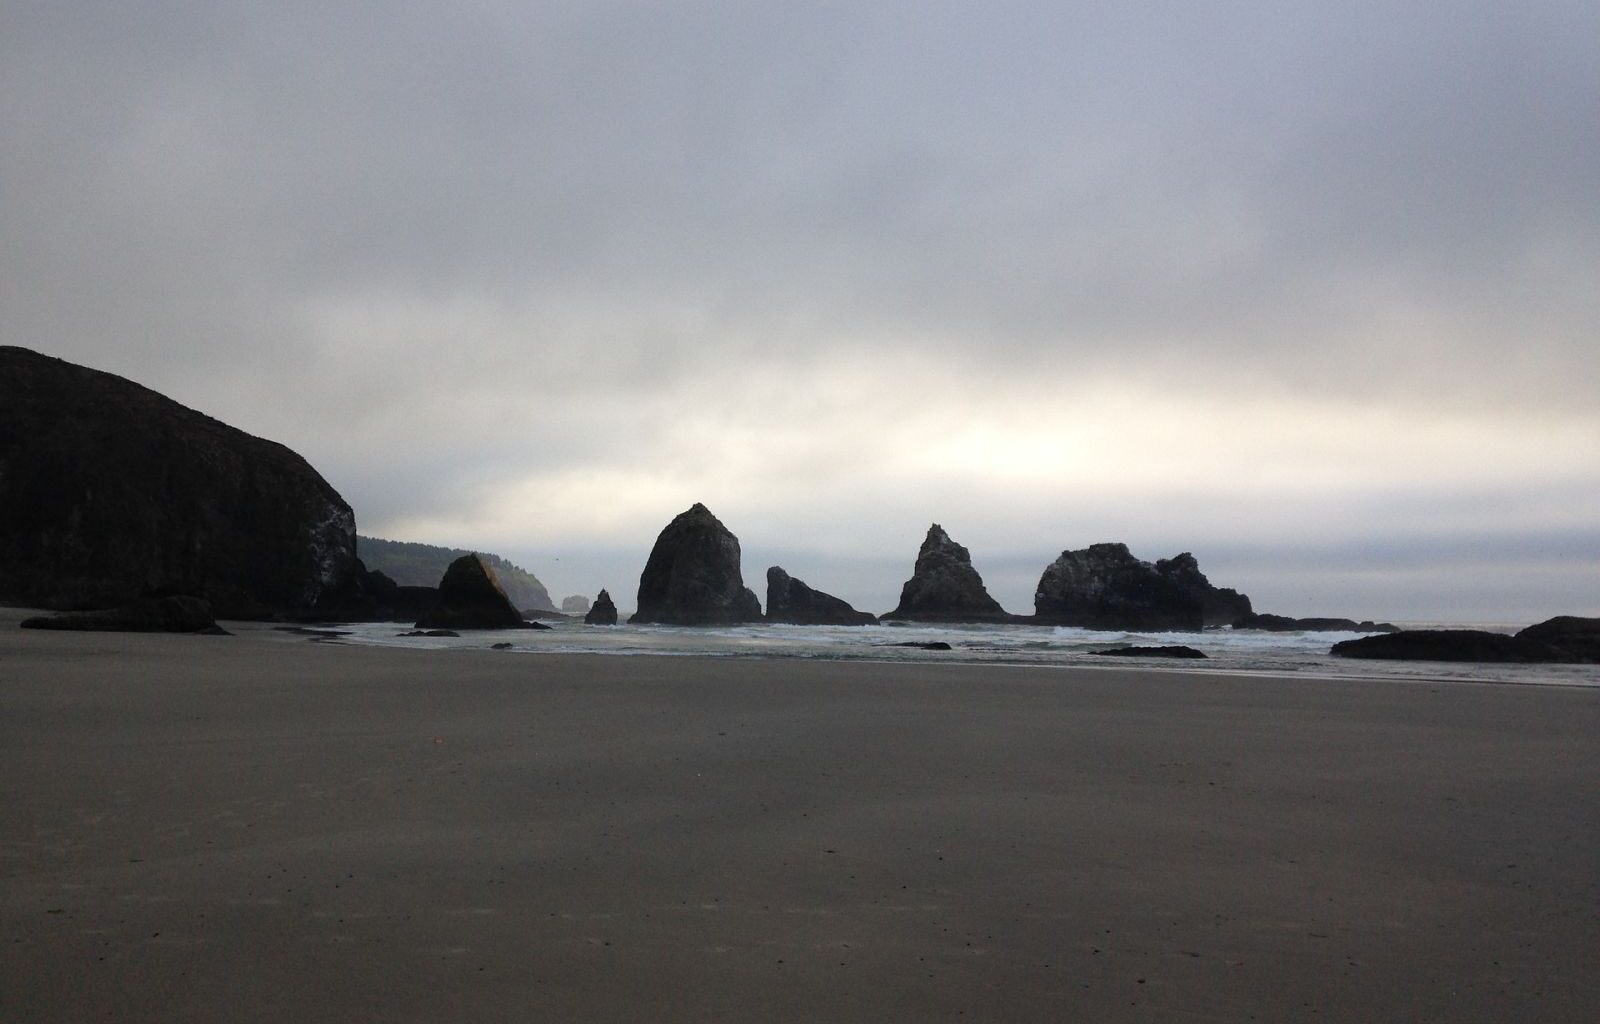 things to do in seaside oregon